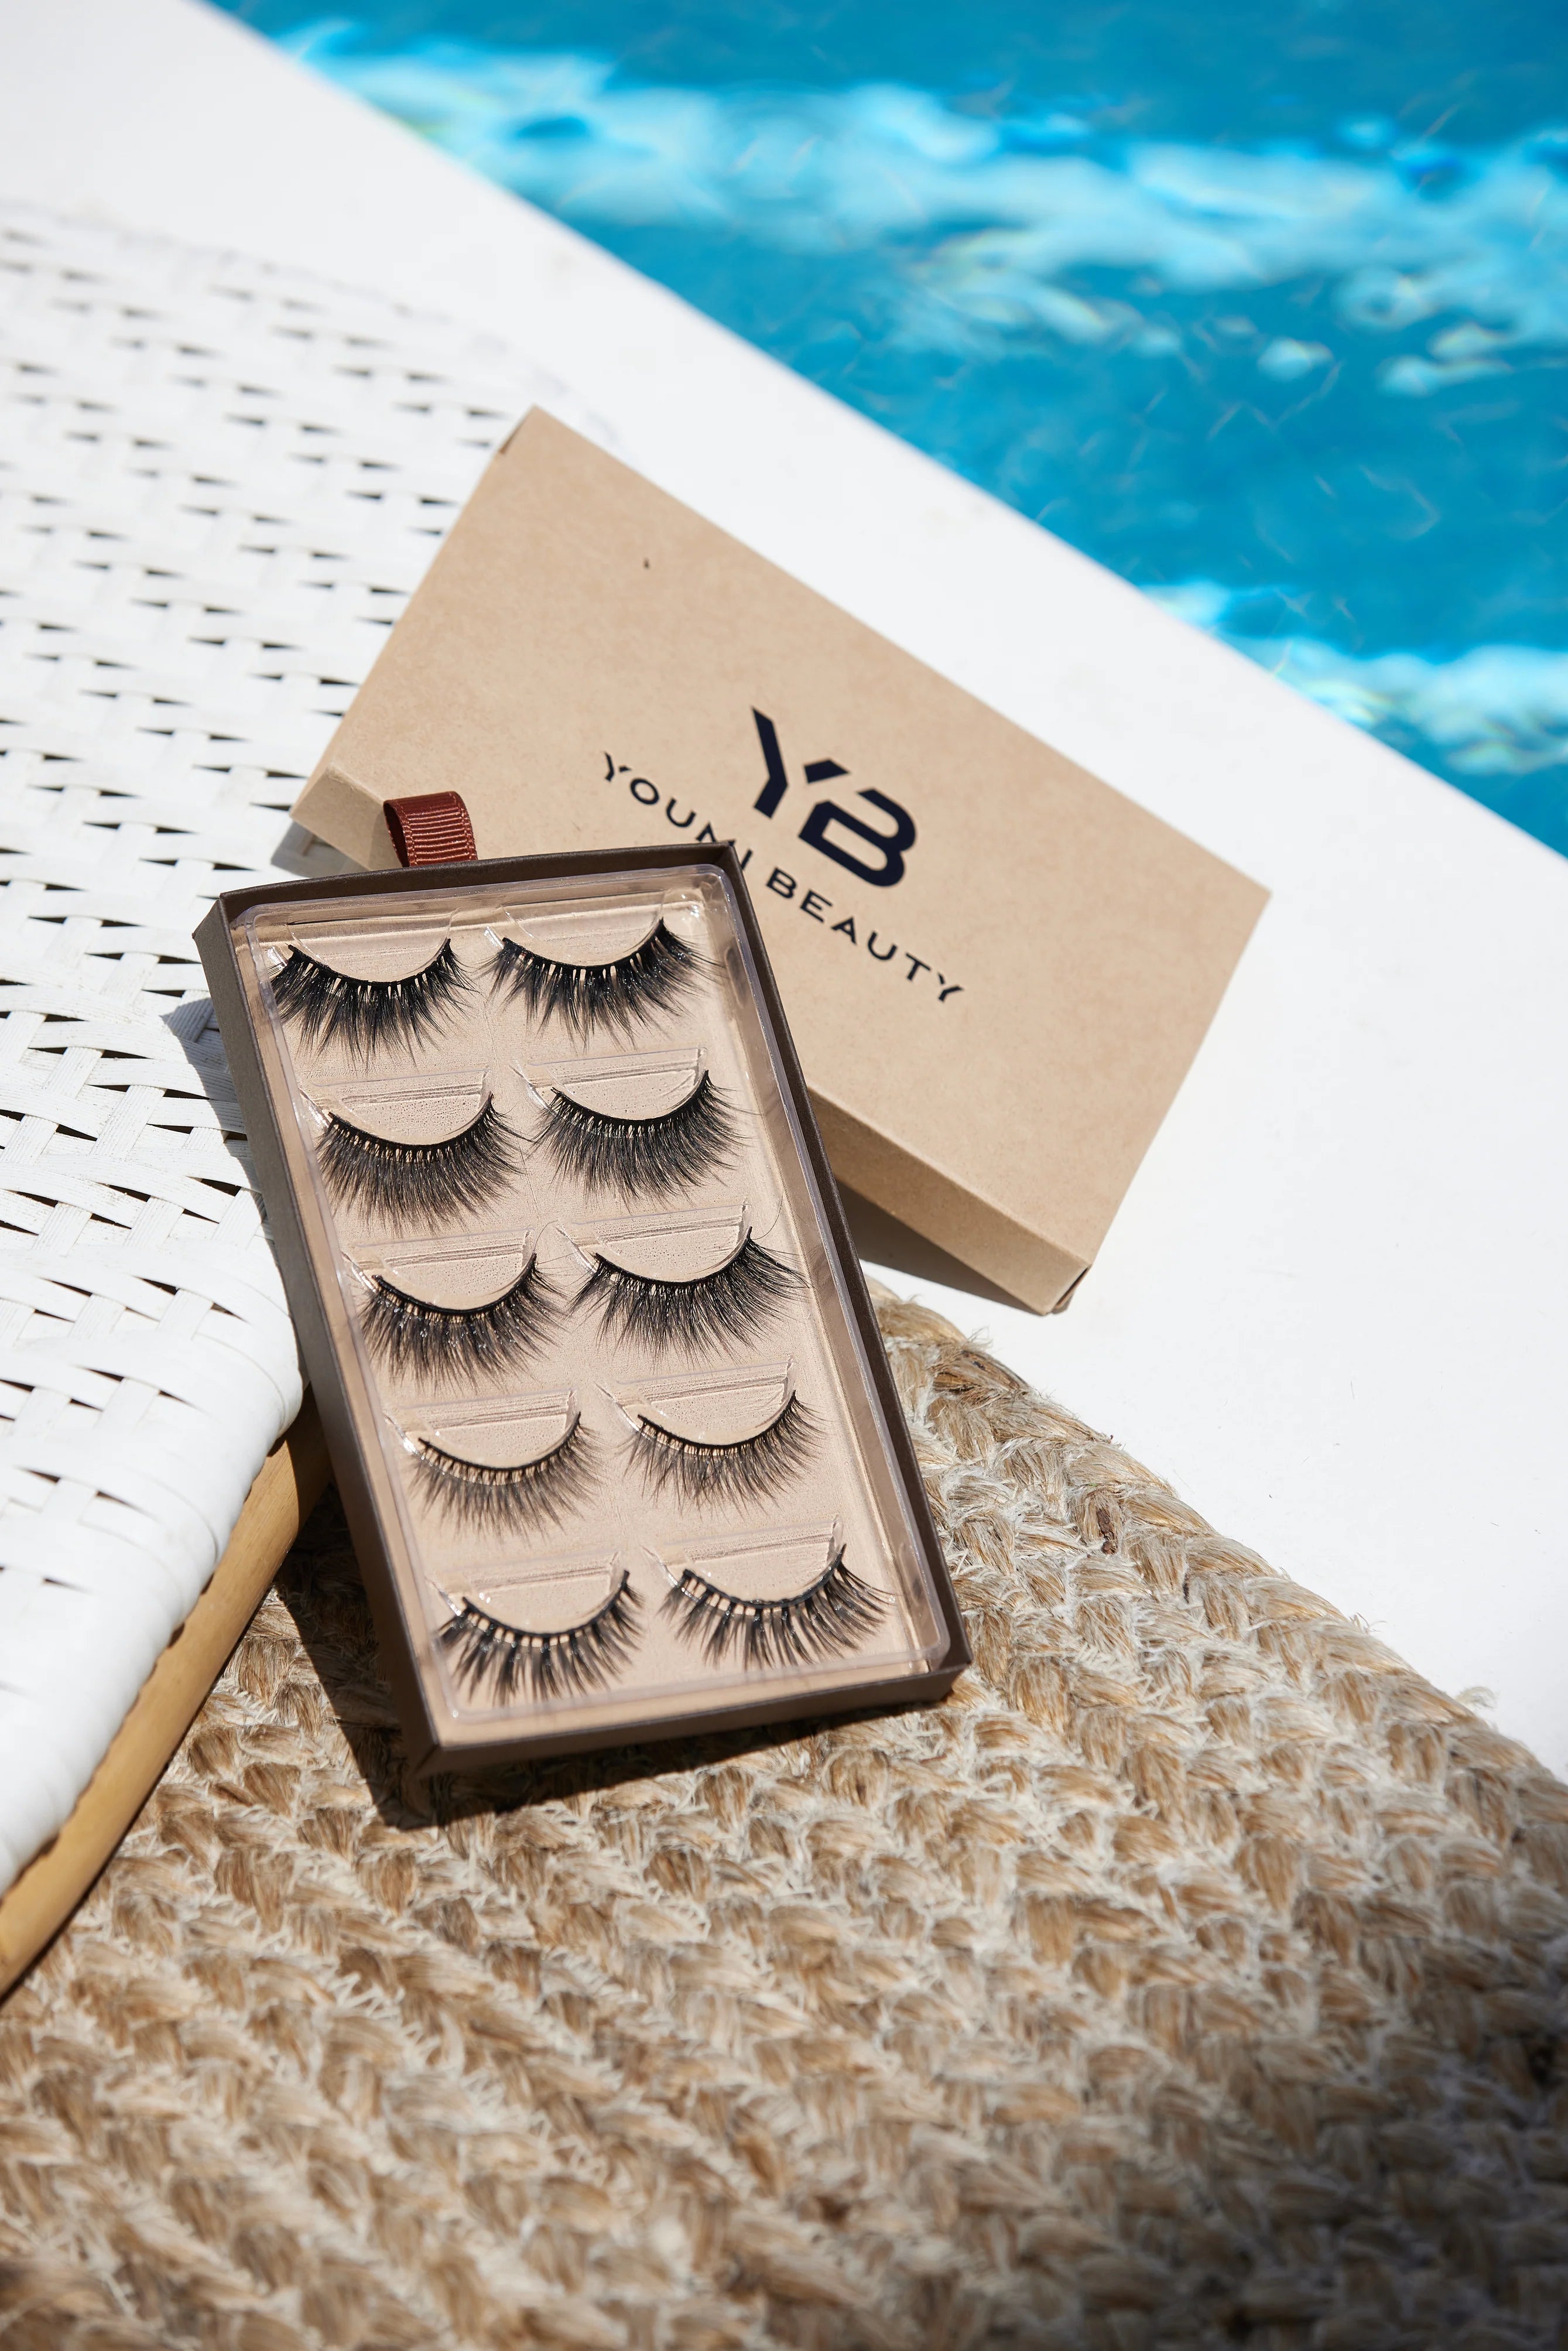 YOUMI BEAUTY - 3D SILK LASHES  يومي بيوتي